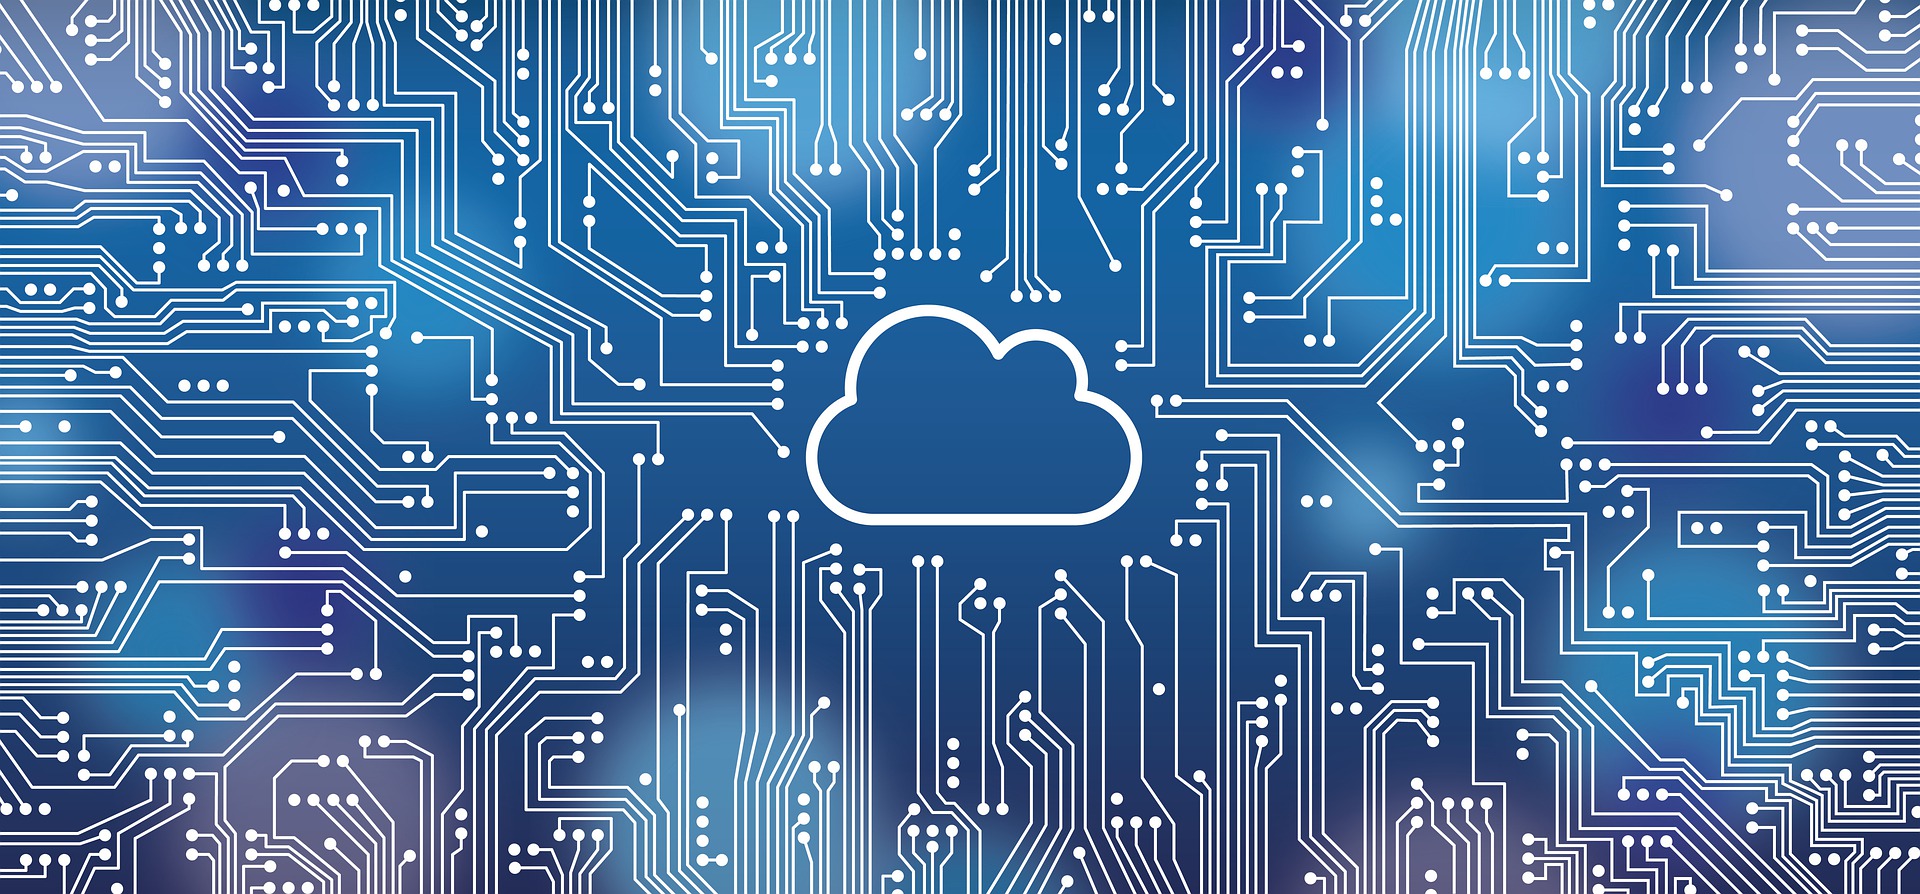 image of a cloud and circuit board pattern